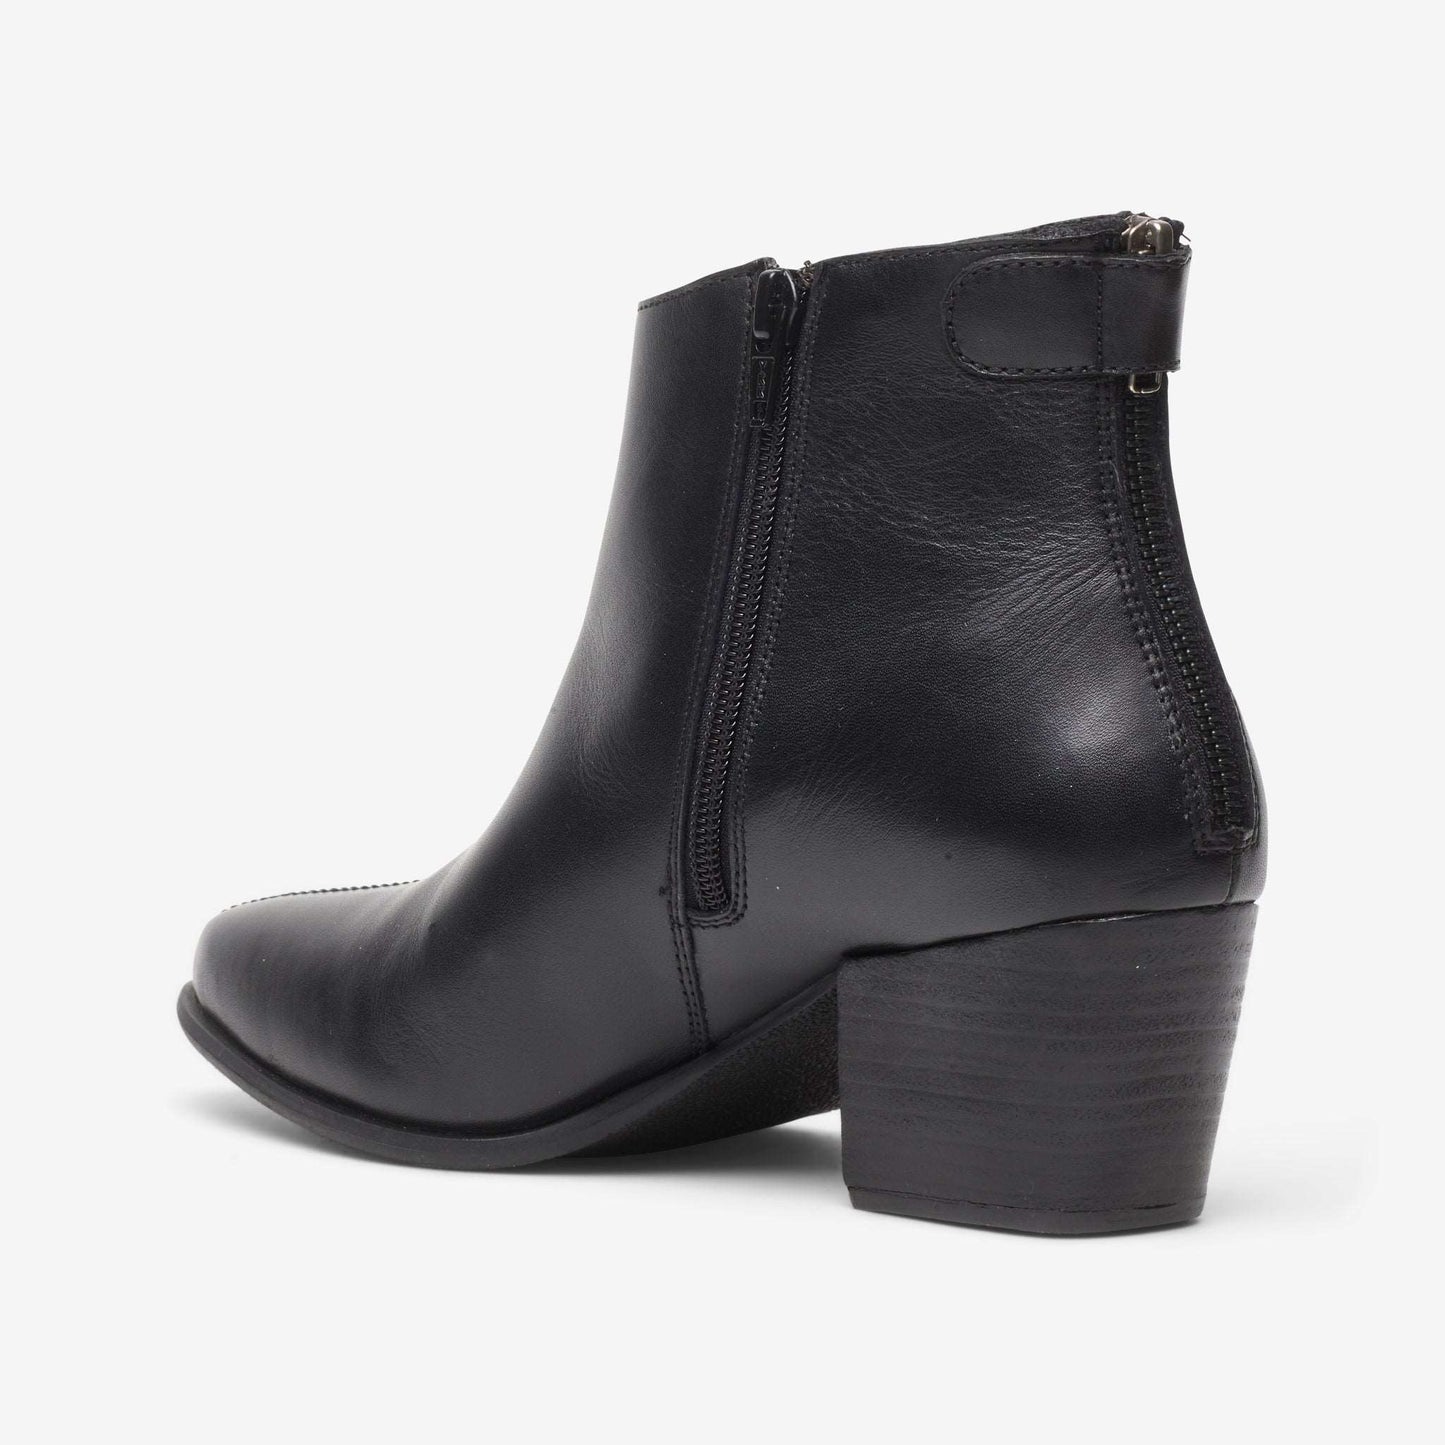 Rear view of zip back wide fit leather ankle boot